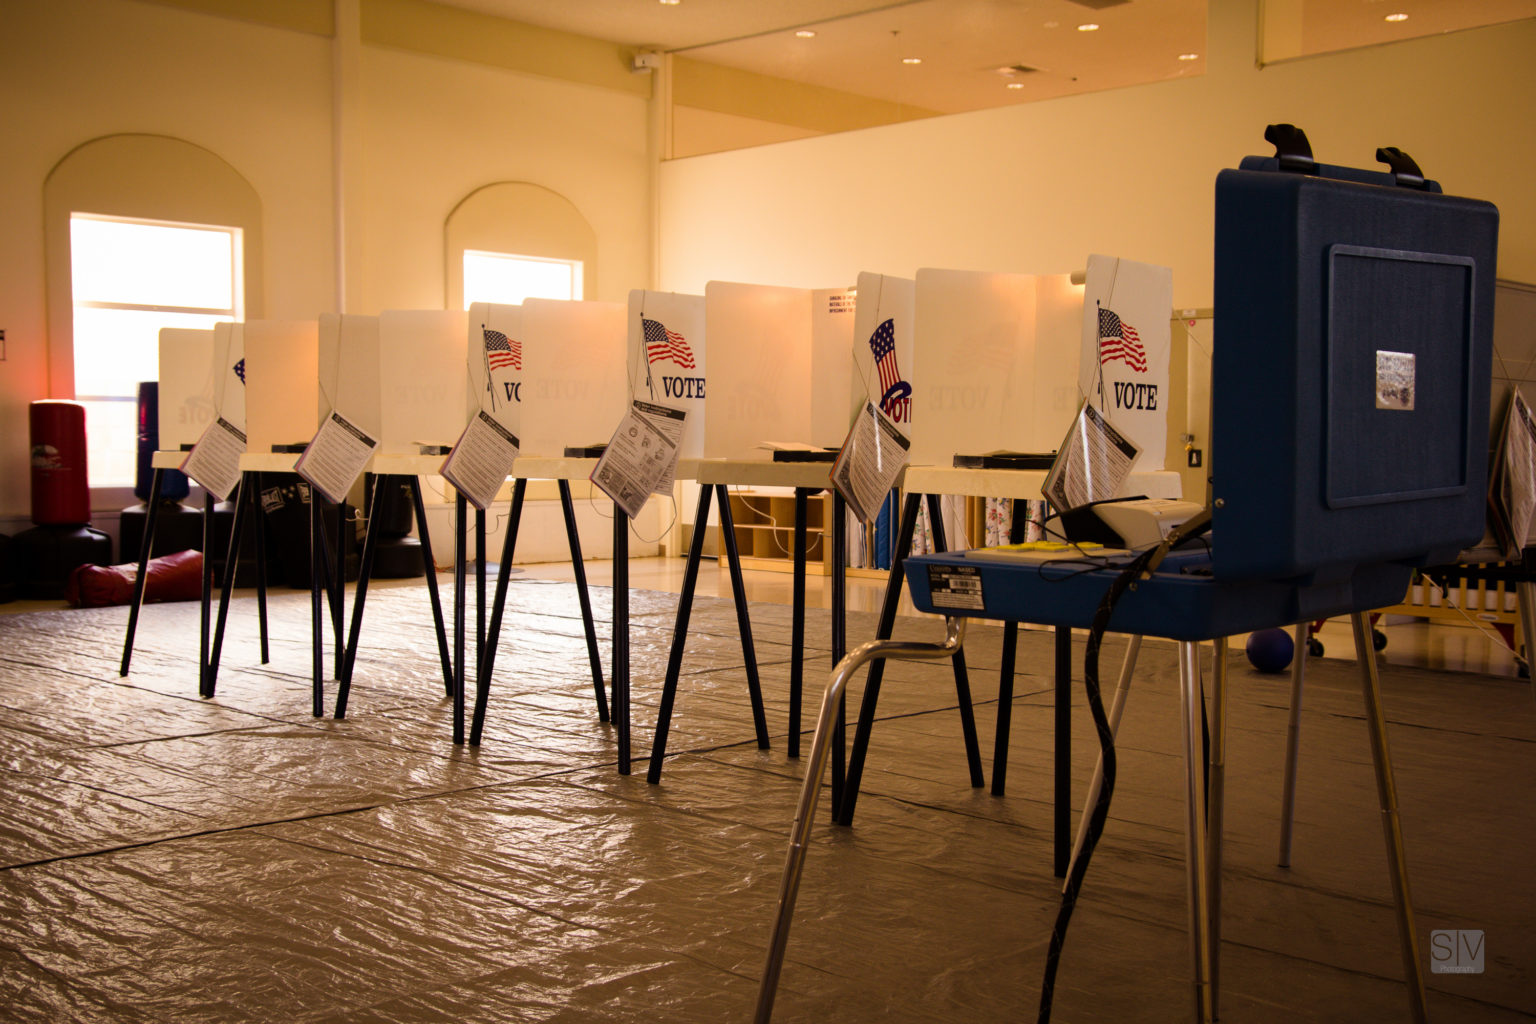 Report: Dominion Voting Machines Were “Intentionally Designed To Create Systemic Fraud”